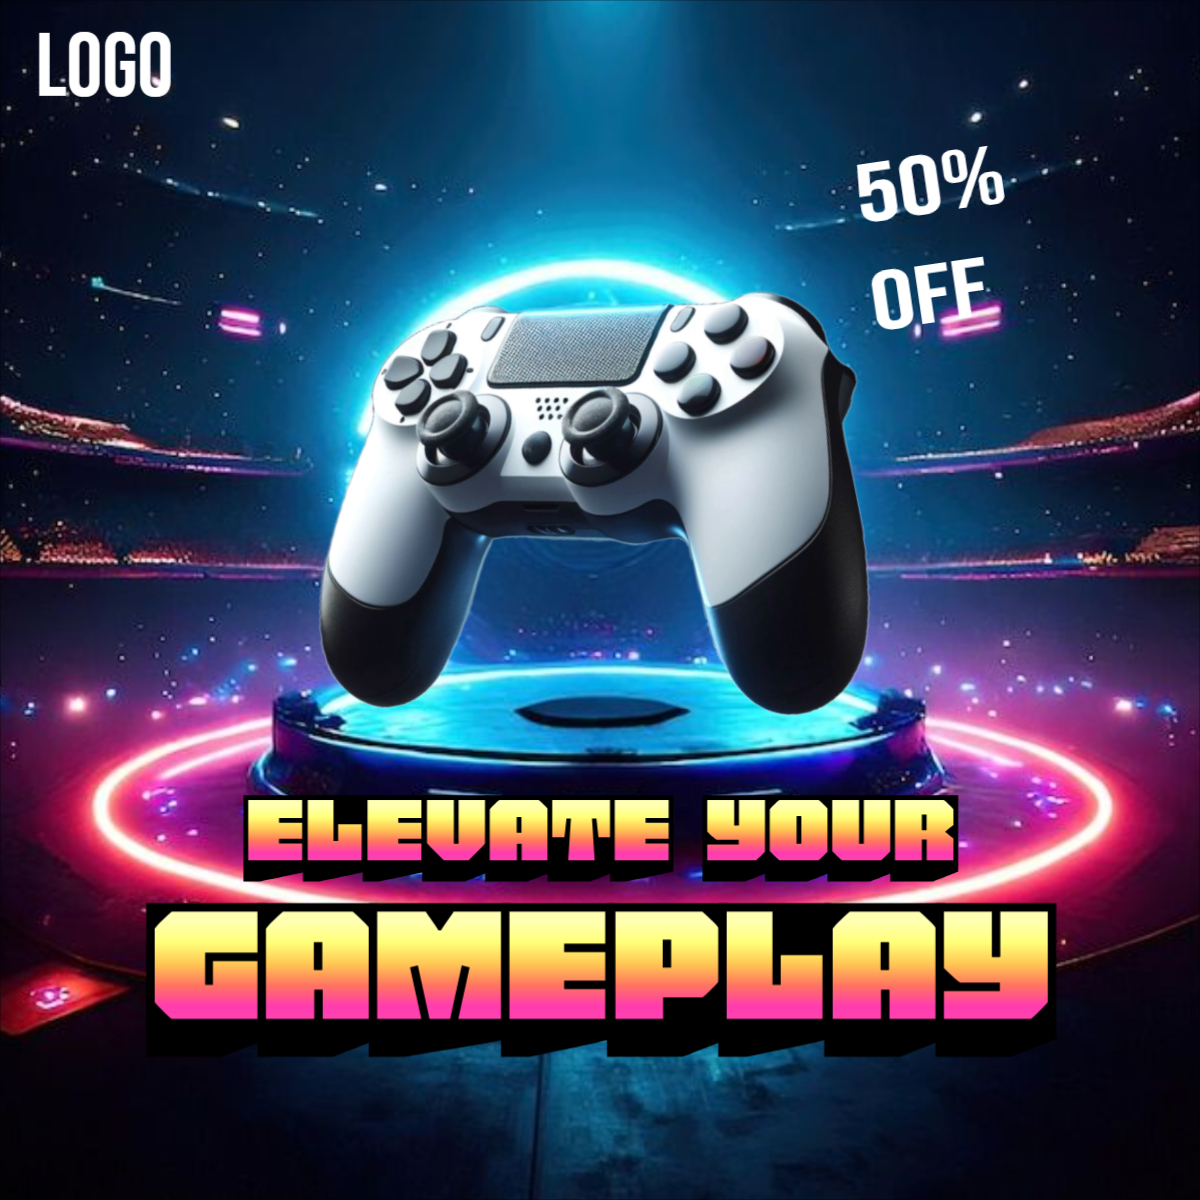 Game Controller New Realese Product Simple Modern Design With Light 3D Template